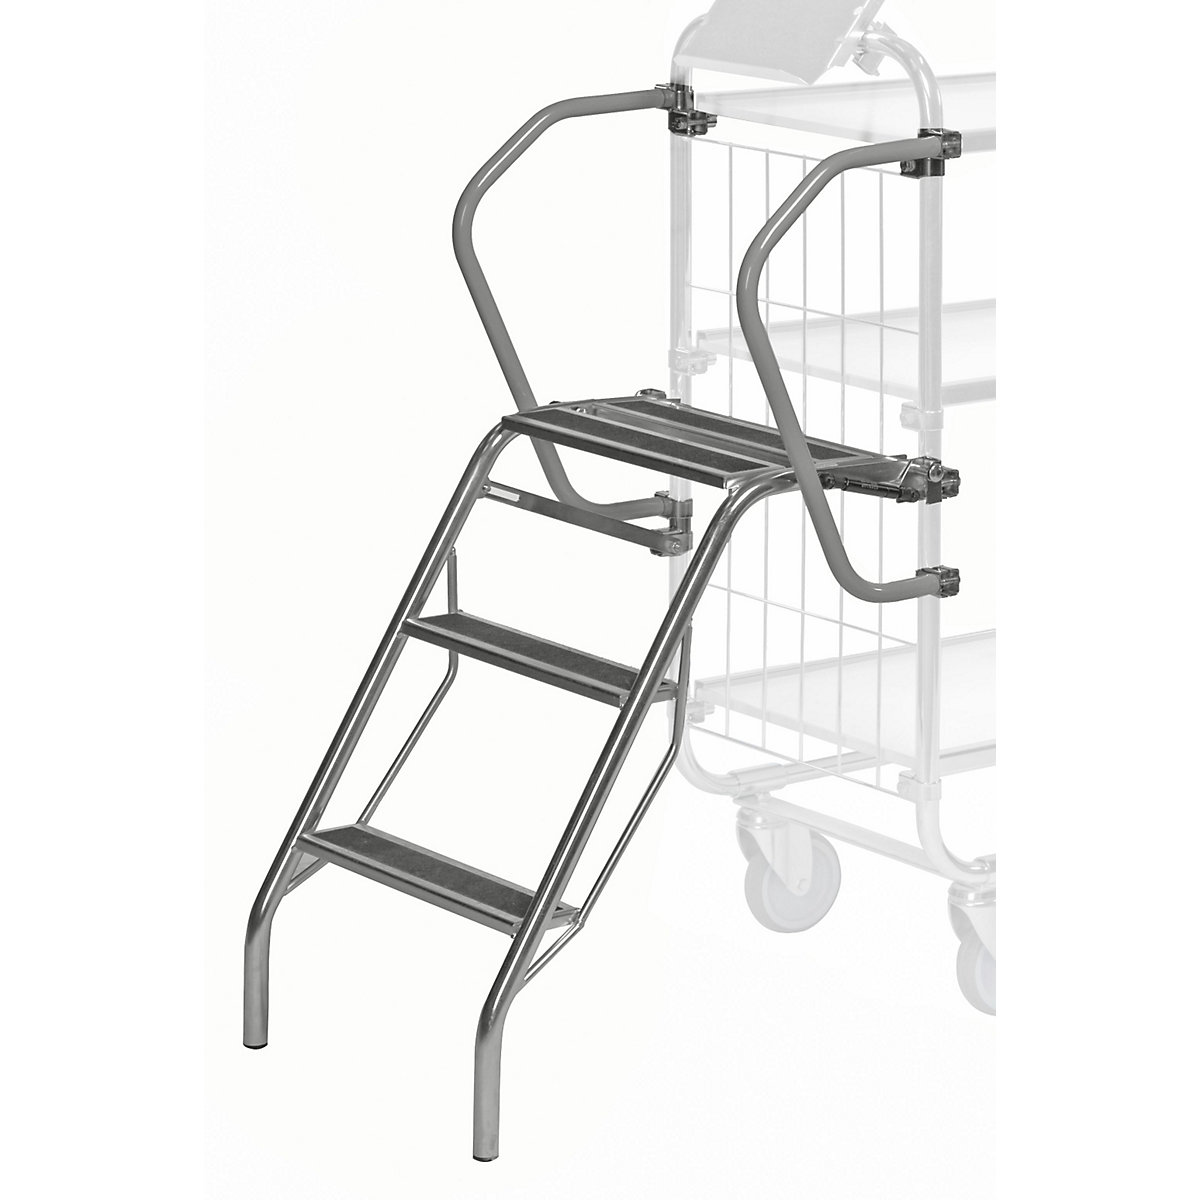 Ladder with two handles - Kongamek